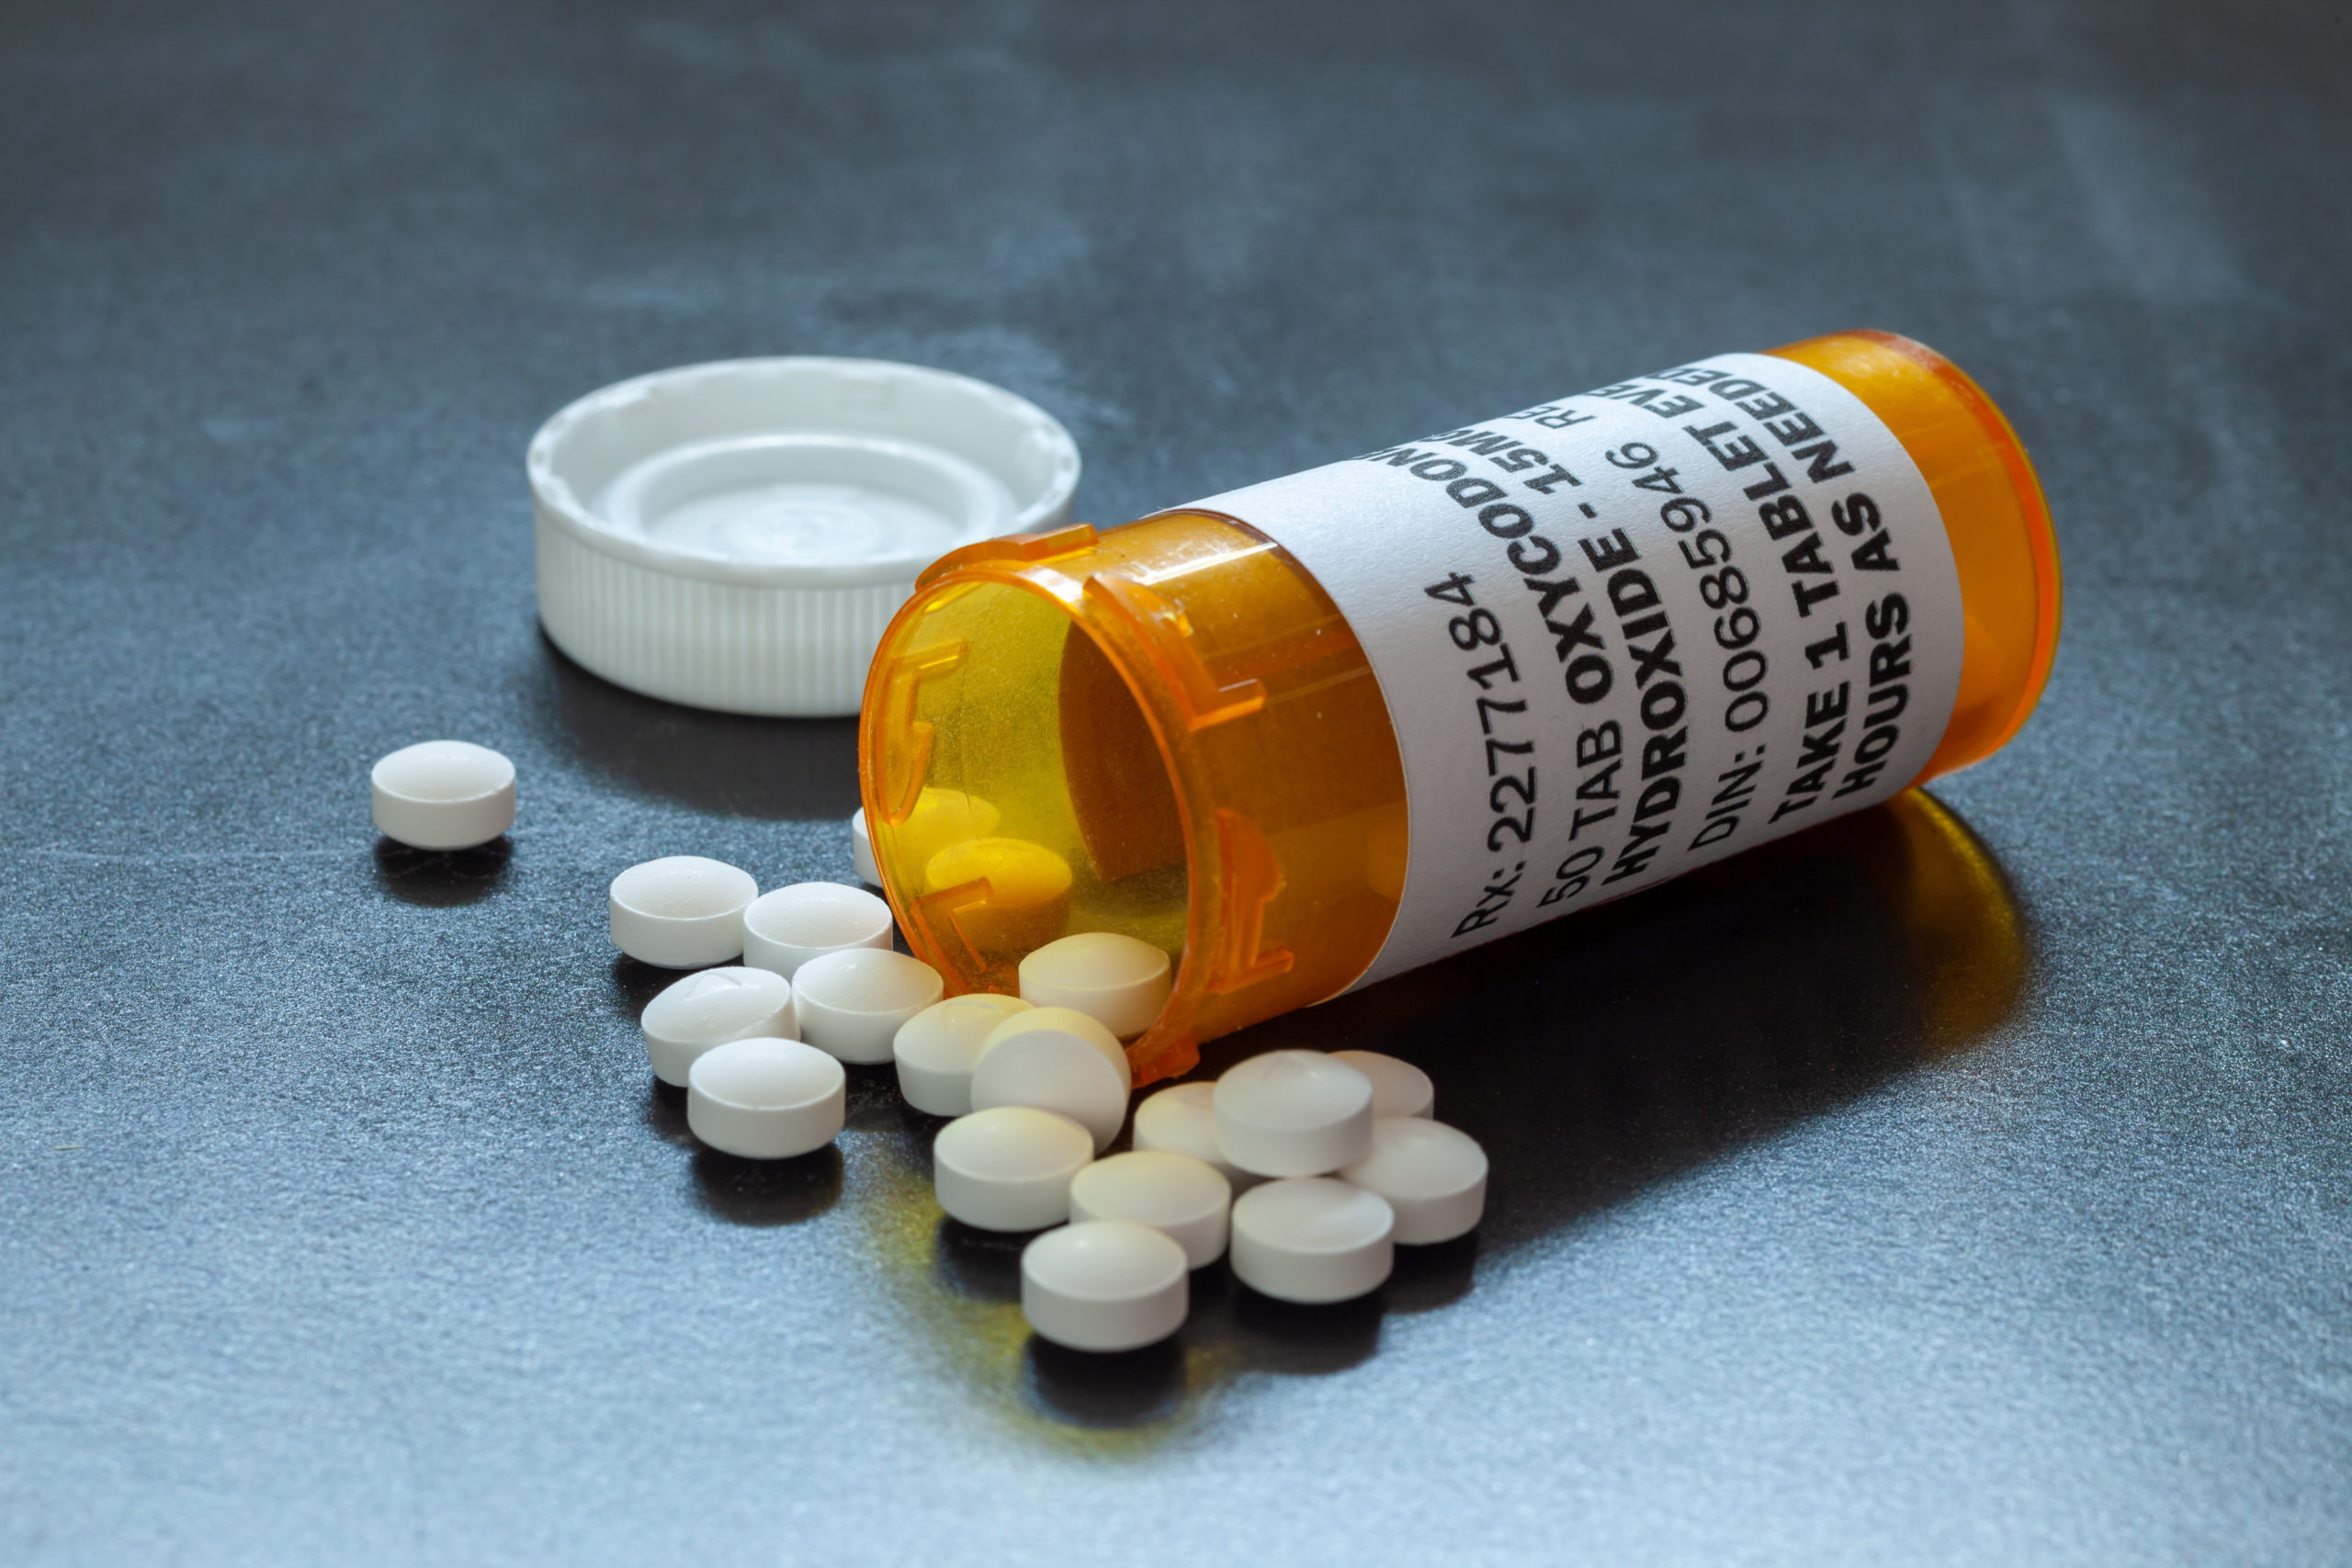 Why is Opioid Abuse Common?